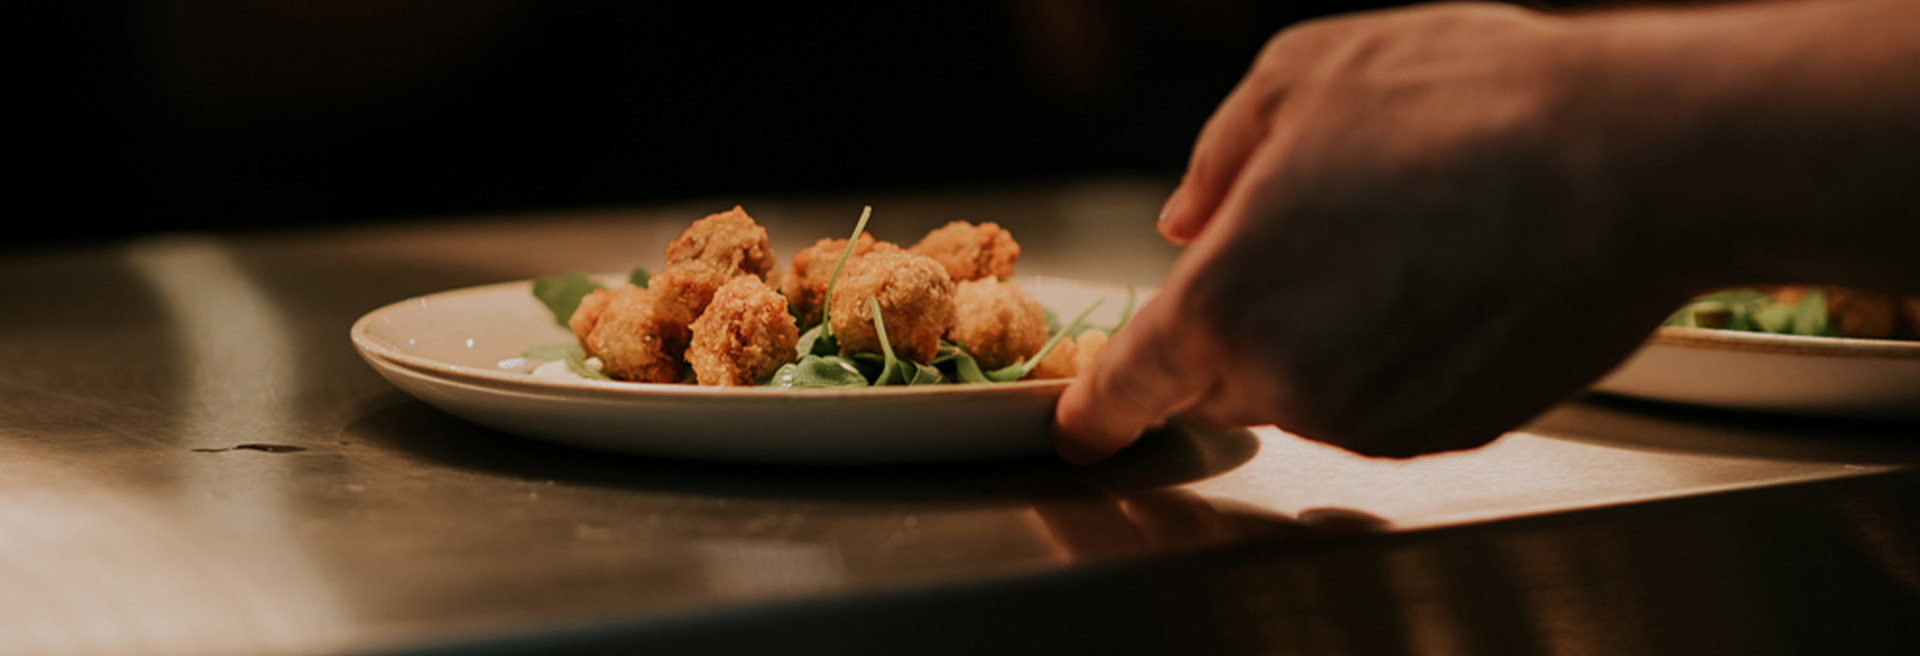 Chicken nuggets on a plate being taken to customer by restaurant staff